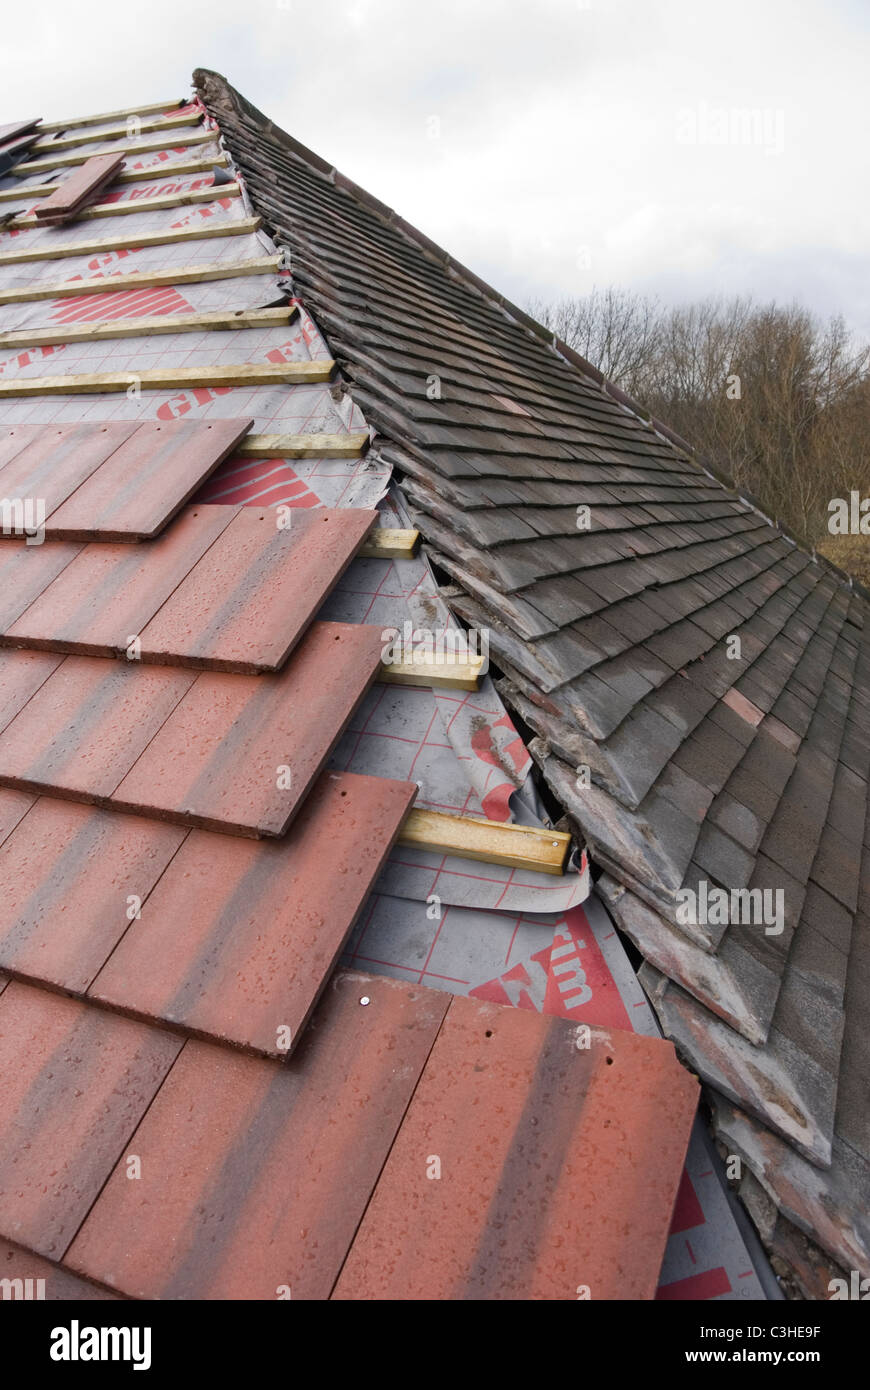 Re Roofing Detail with Old Rosemary Roof Tiles and New Larger Modern Marley Tile, by Ontop Roofing, Sheffield, England Stock Photo